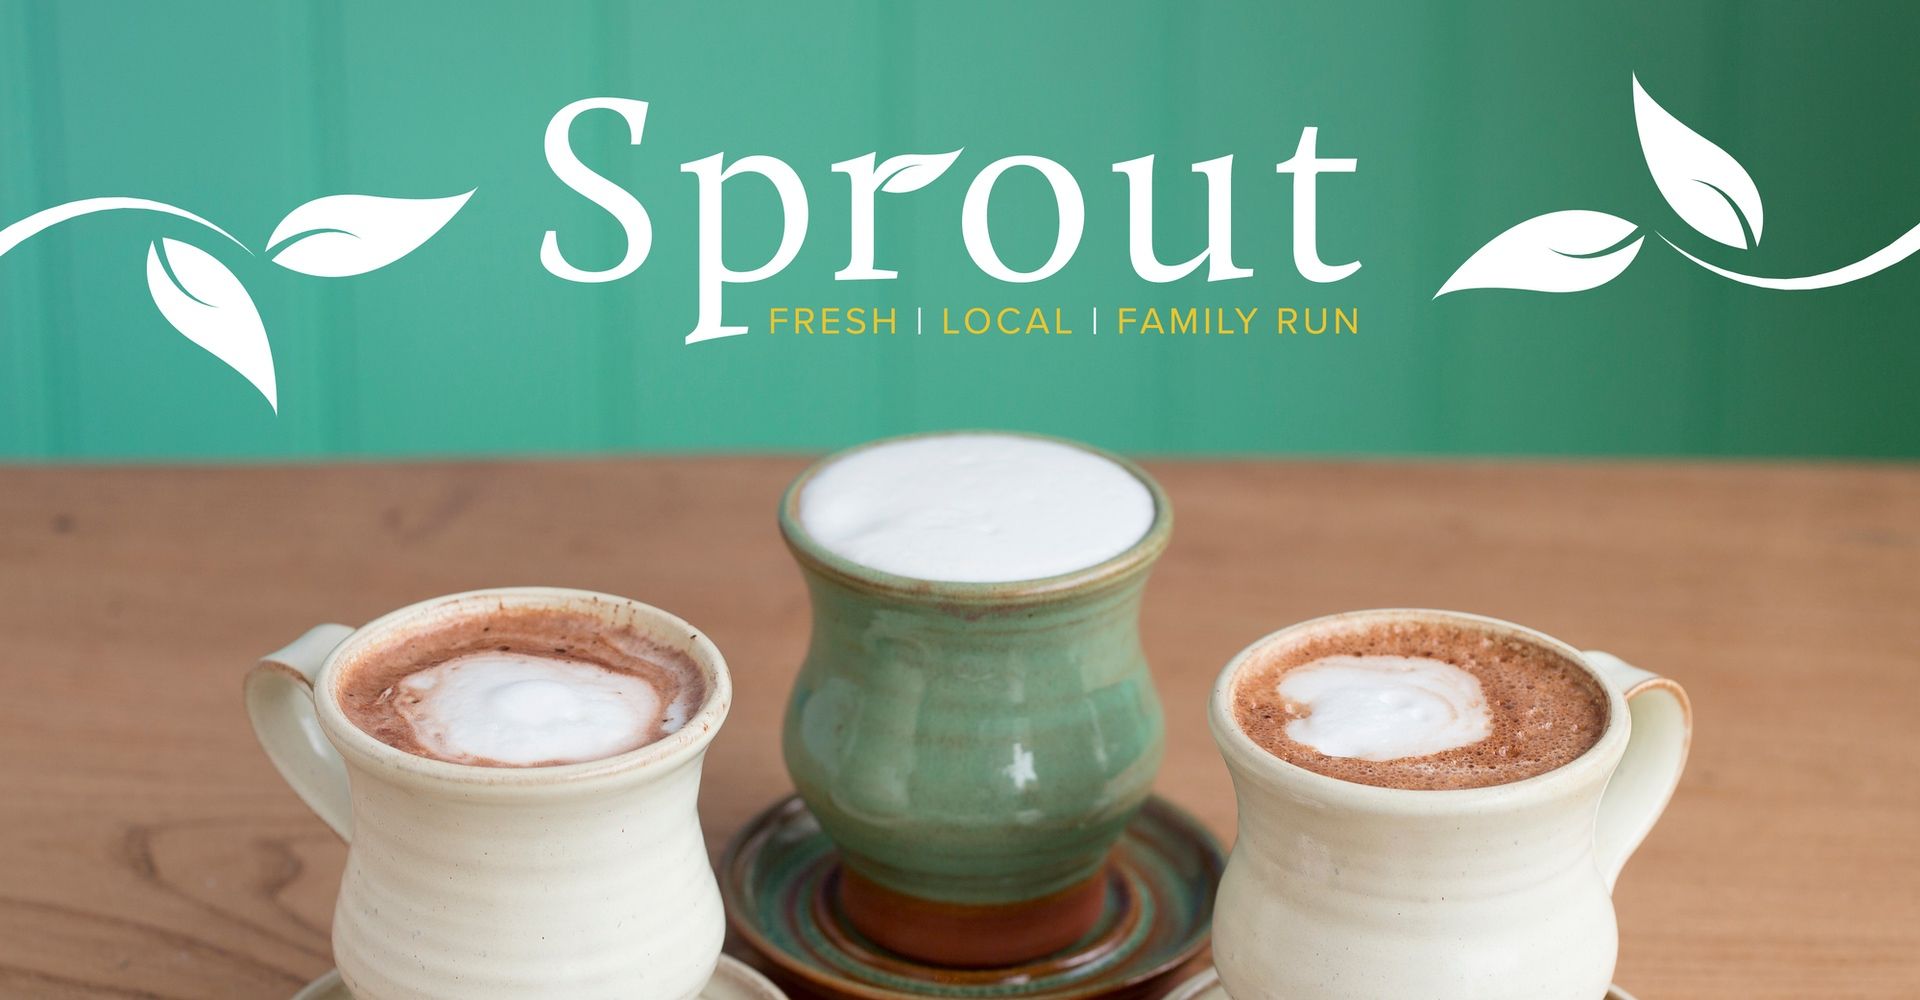 Sprout logo against green background above three full coffee cups.